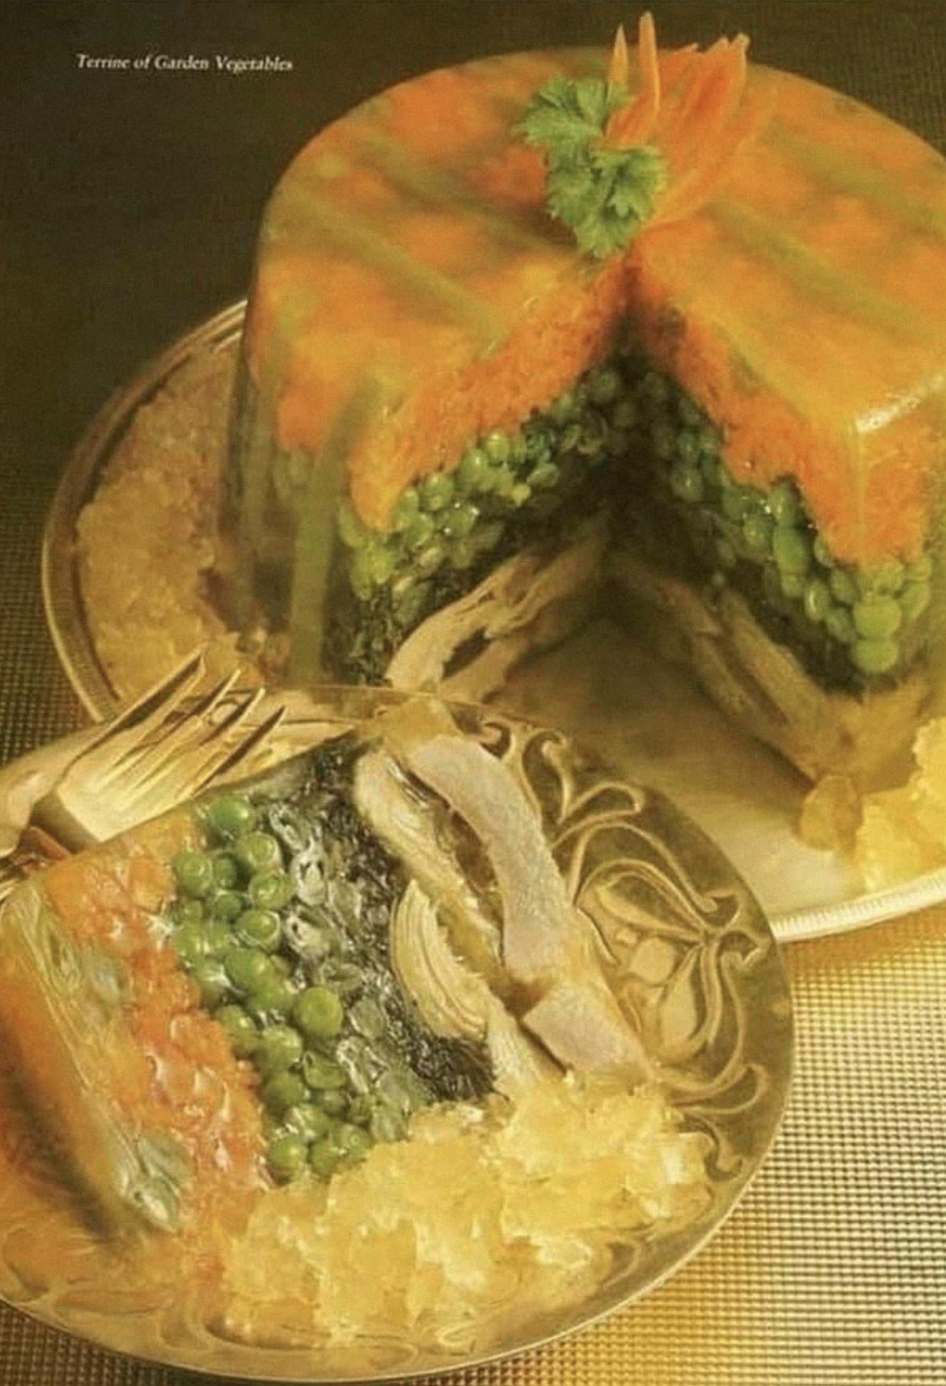 70s cookbooks were a lawless wasteland